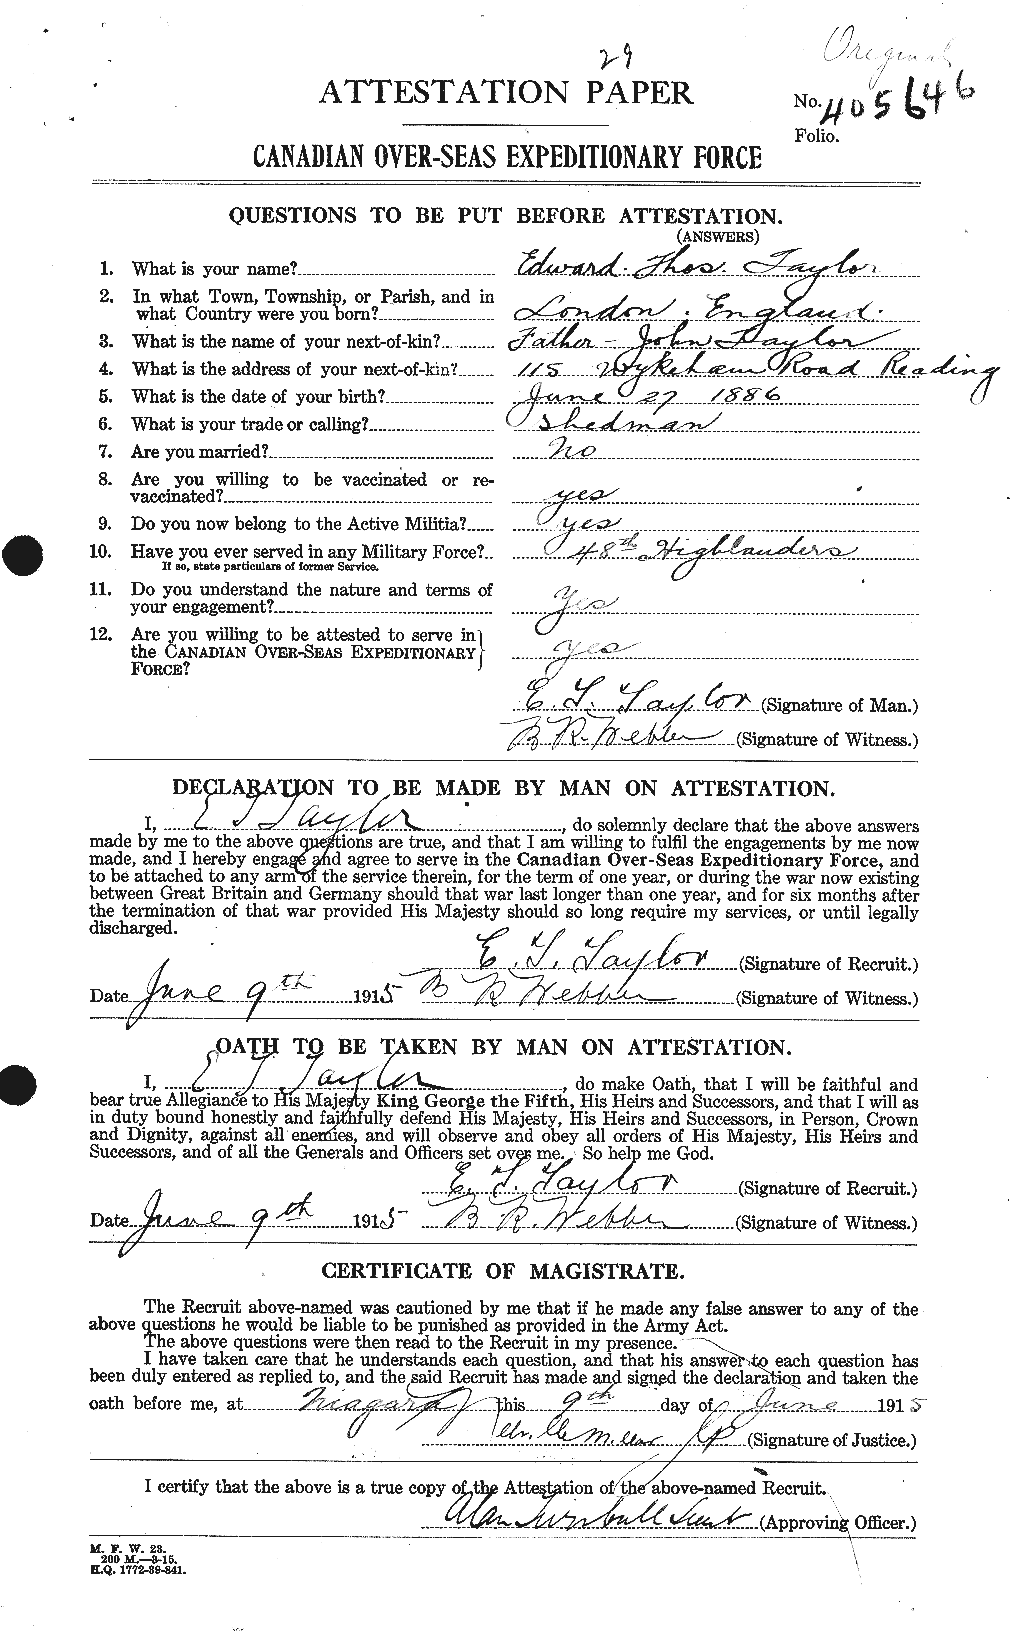 Personnel Records of the First World War - CEF 627328a